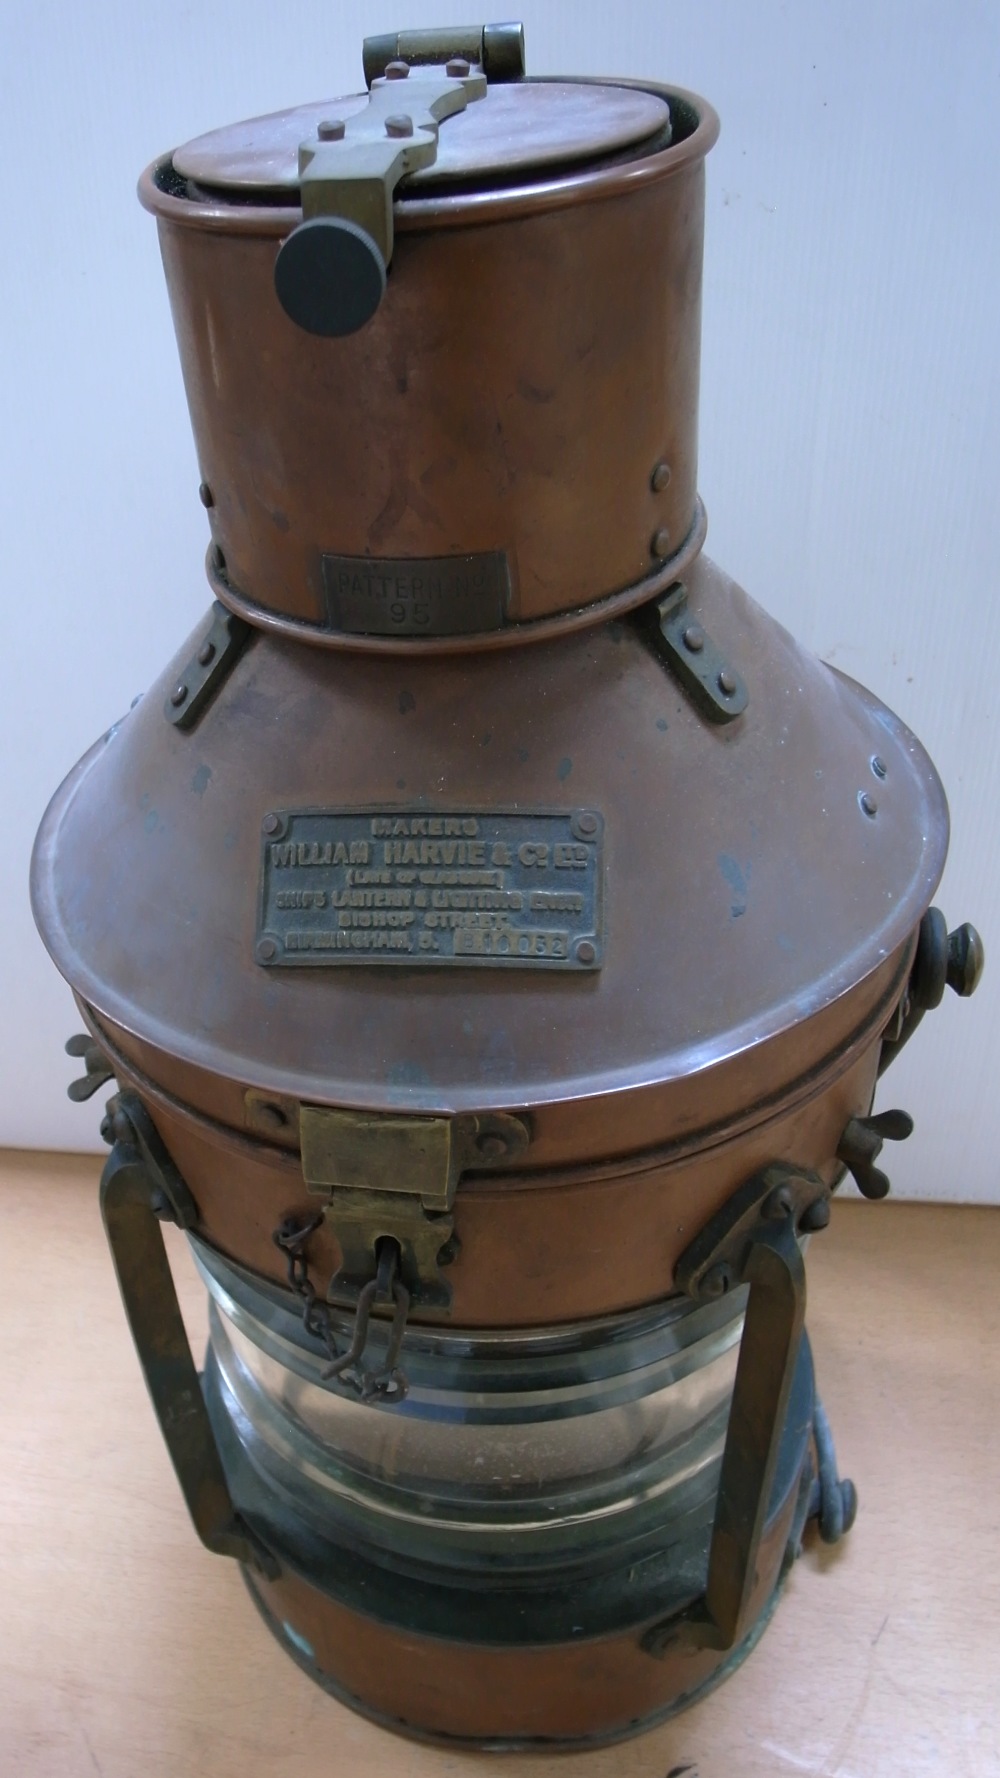 A large copper ship's "At anchor" or "Not under command" lamp,